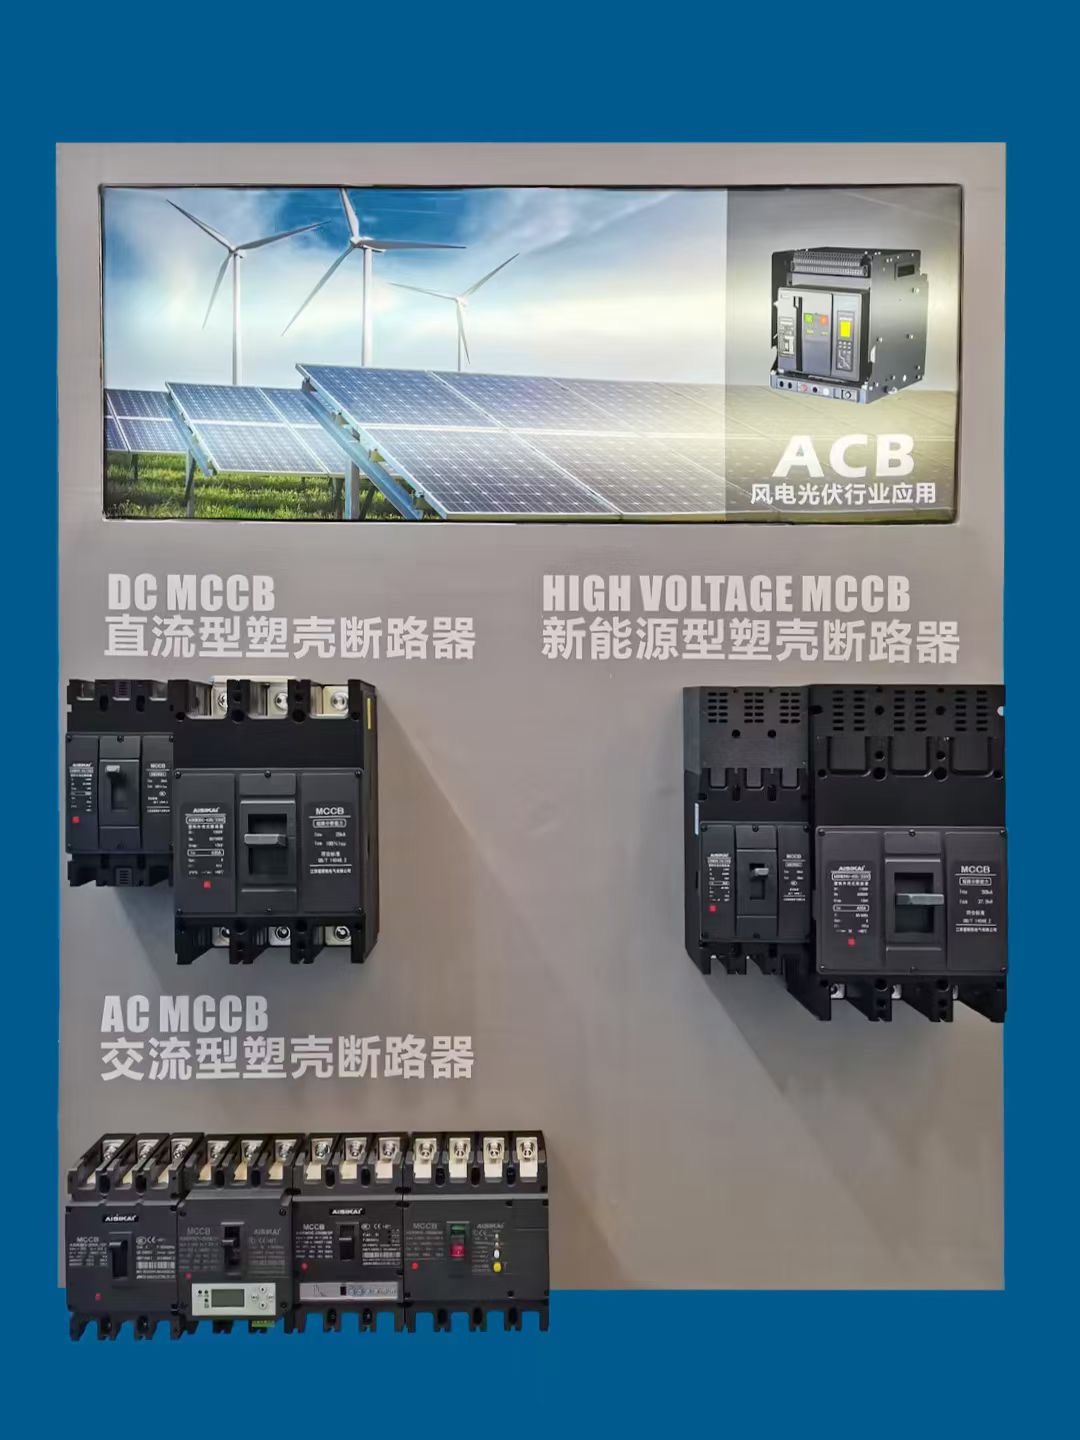 AISIKAI Participate in the SNEC2023 International Energy Storage Technology Exhibition